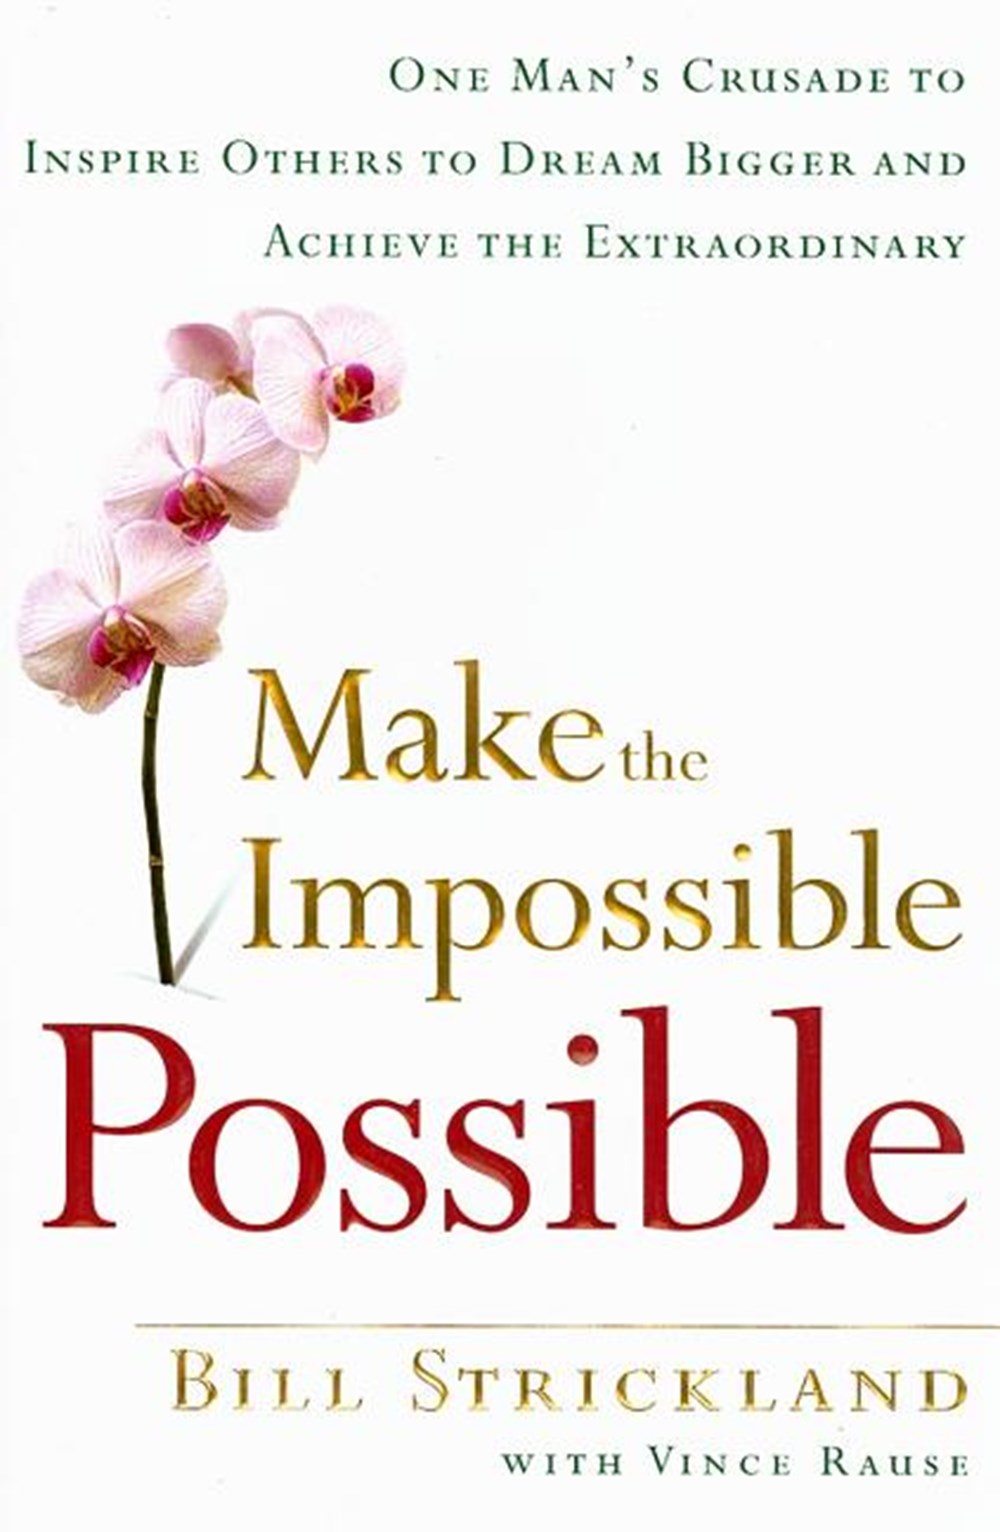 Make the Impossible Possible One Man's Crusade to Inspire Others to Dream Bigger and Achieve the Ext